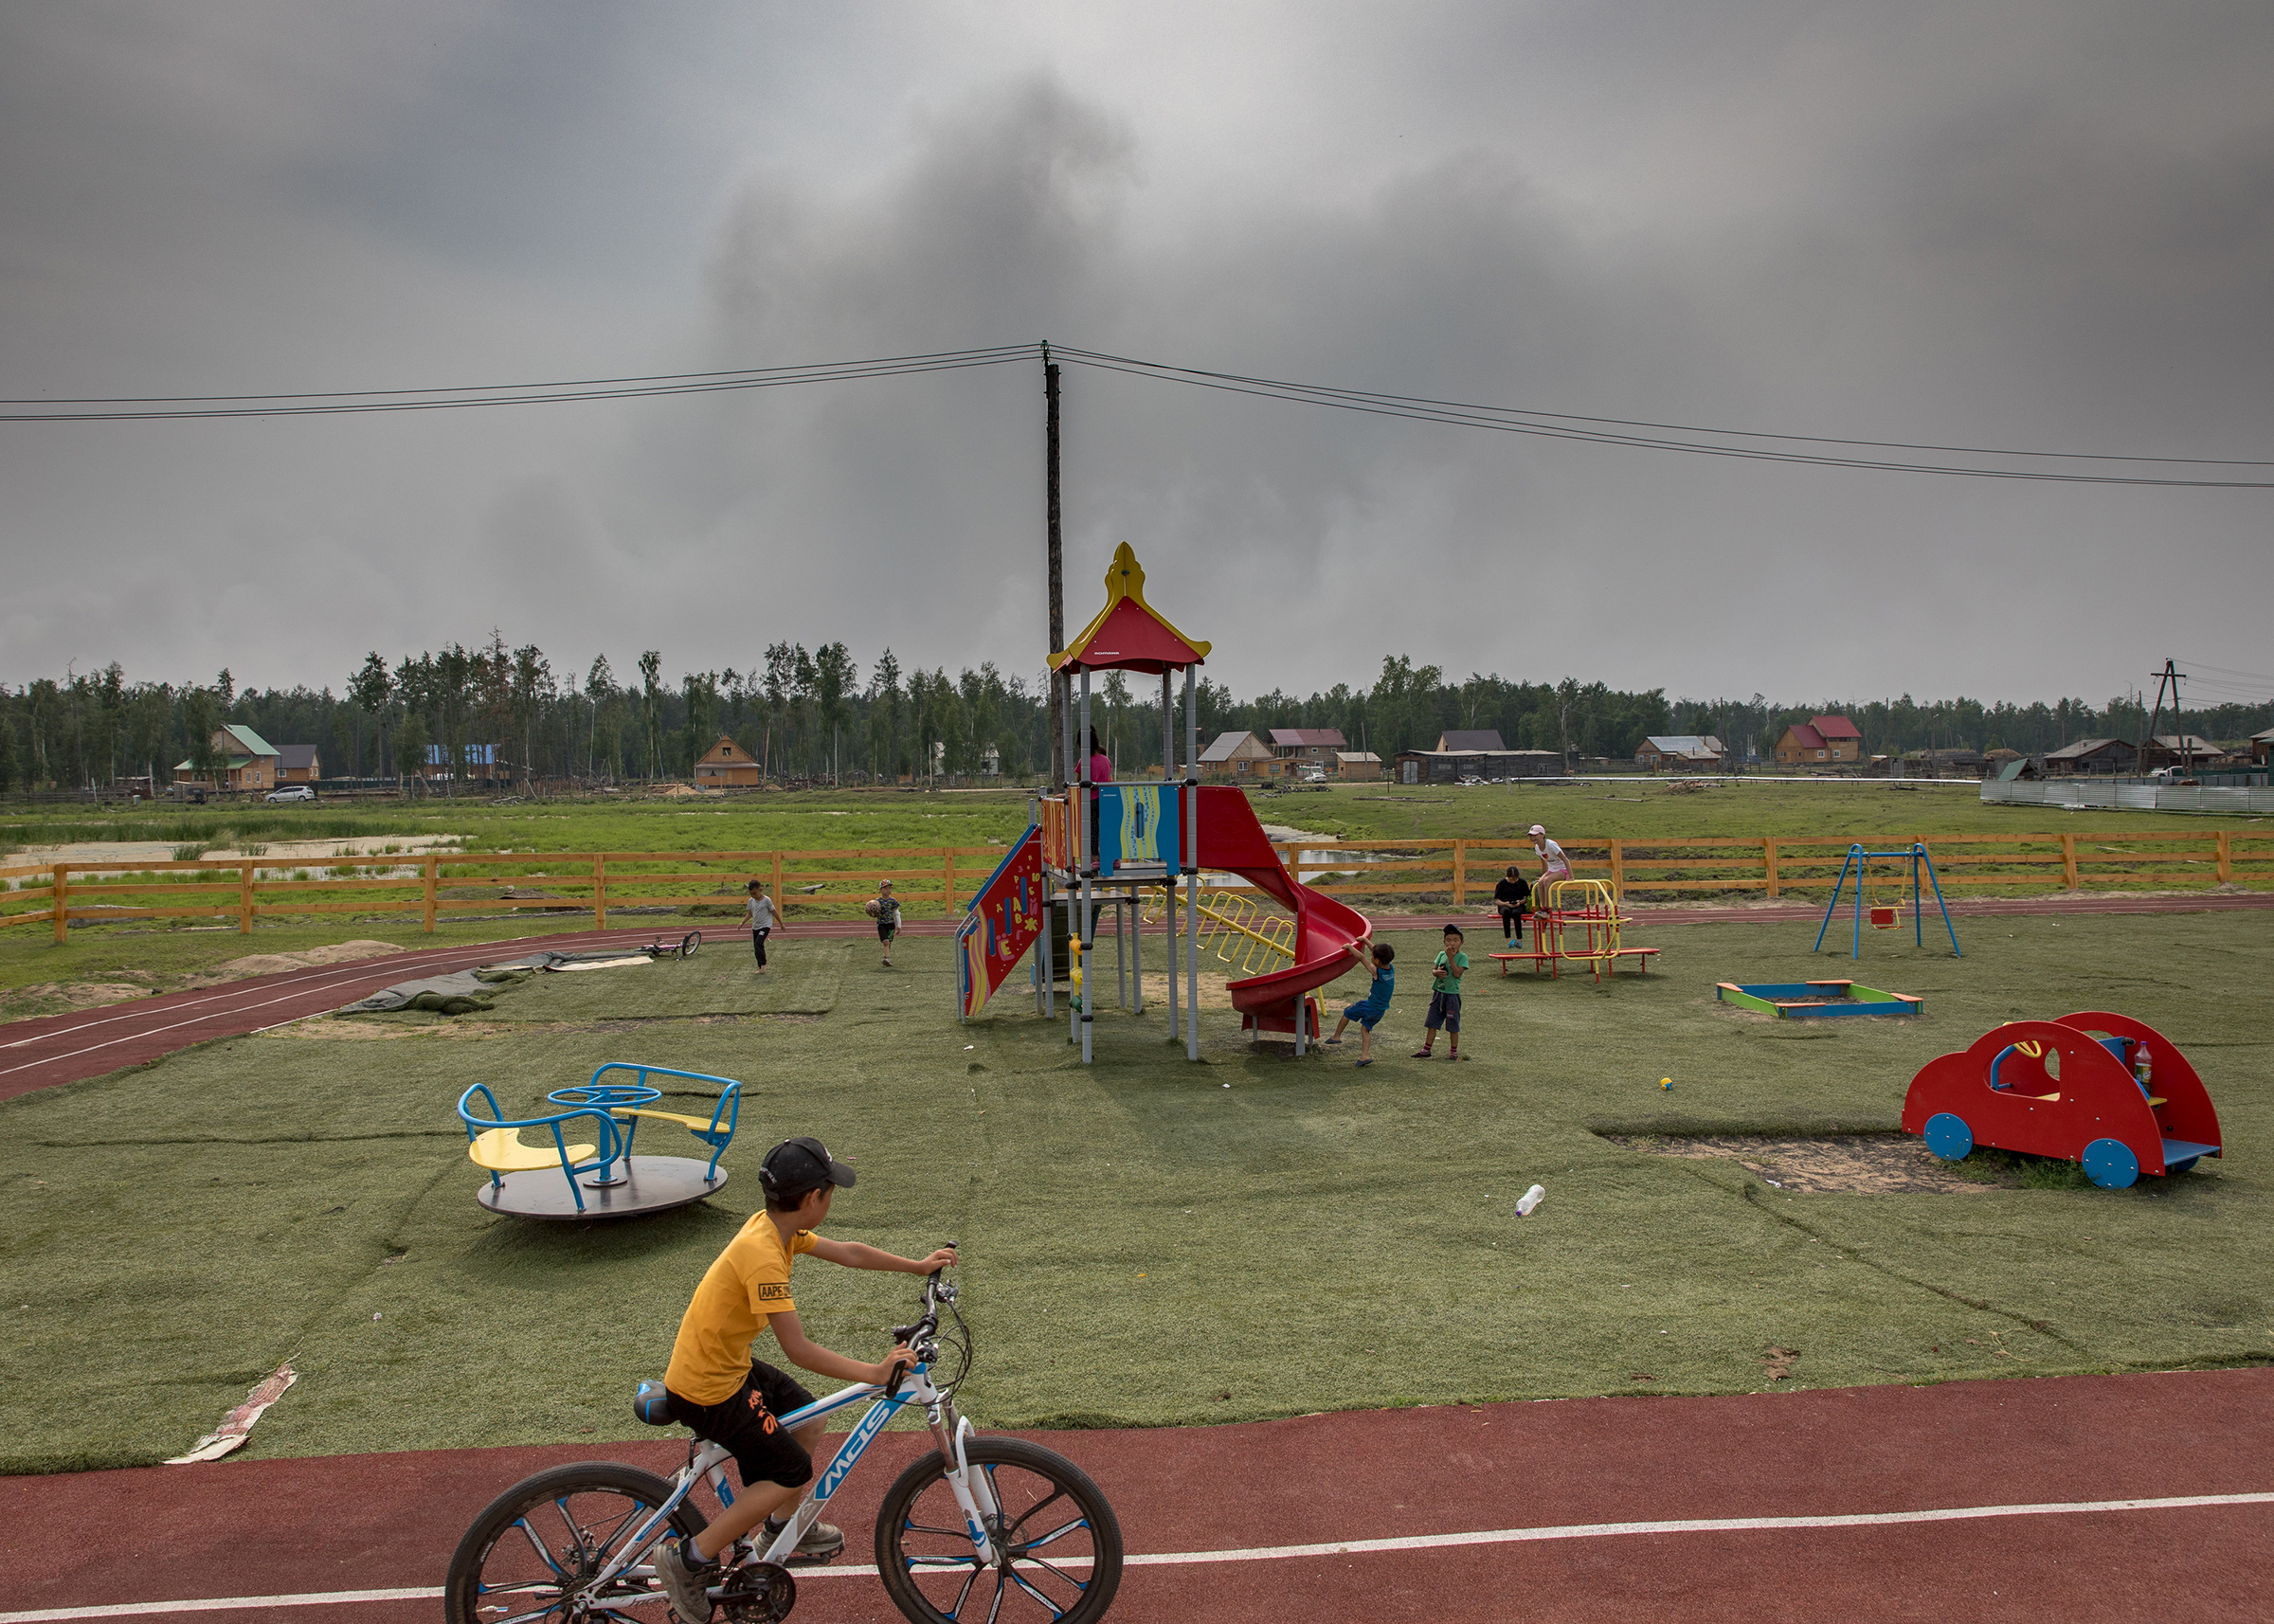 Smoke from a forest fire 3 kilometers away, seen from a playground in the village of Dikimdya.